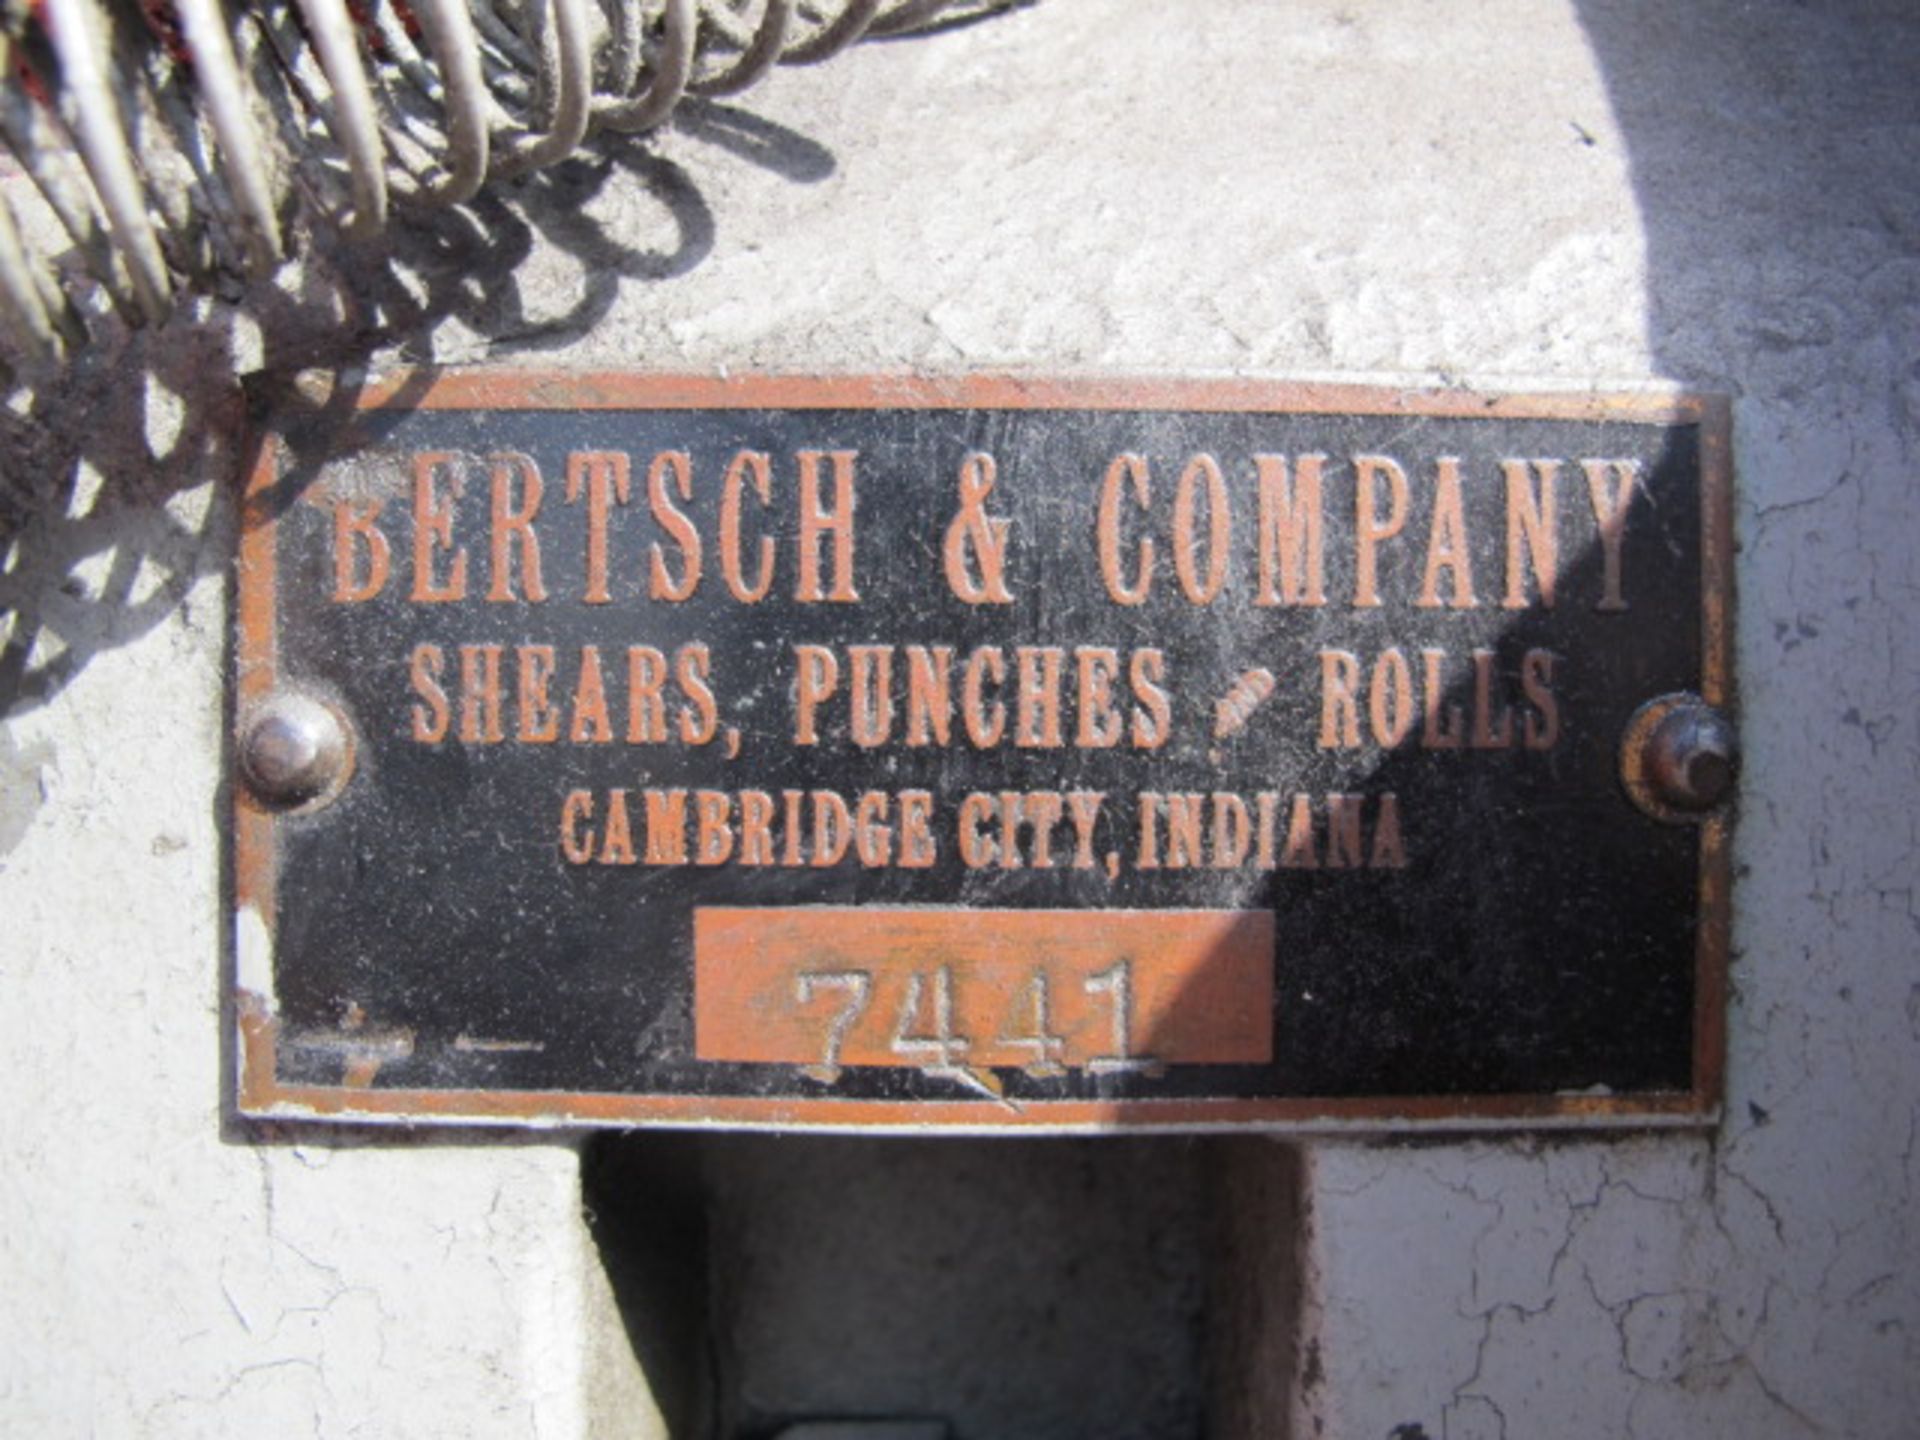 Bertsch & Co. 10' Deep Throat Power Shear s/n 7441 w/ Manual Back Gage, 25" Throat, 33 1/2"Supports - Image 3 of 6